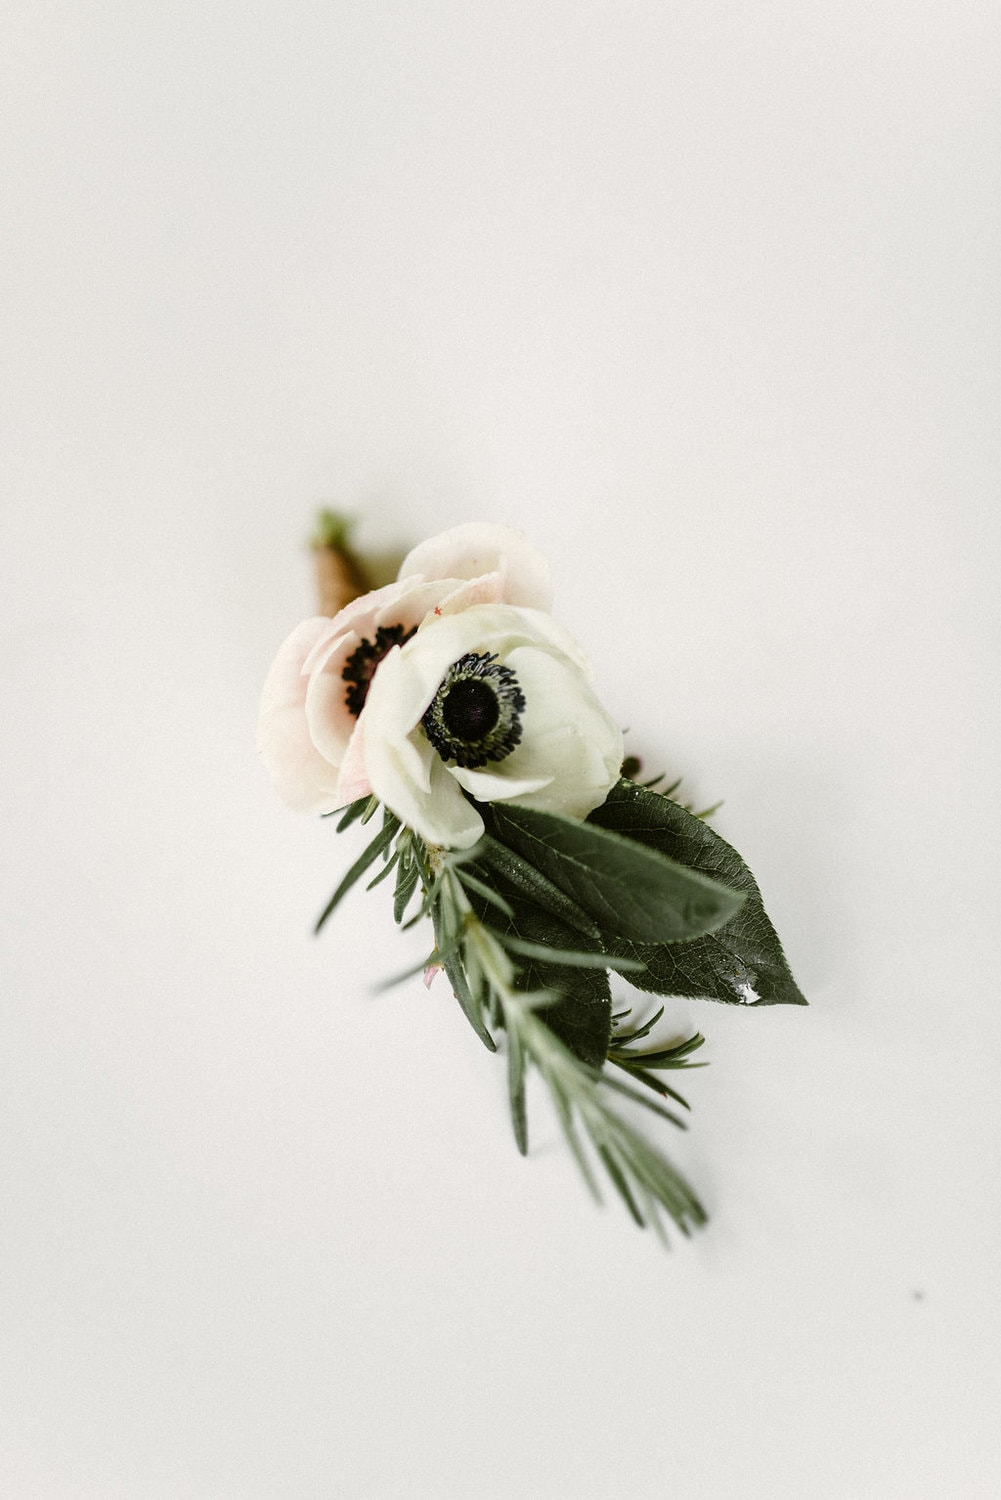 contact earth within flowers Groom boutonniere in Missoula, Montana Missoula Florist